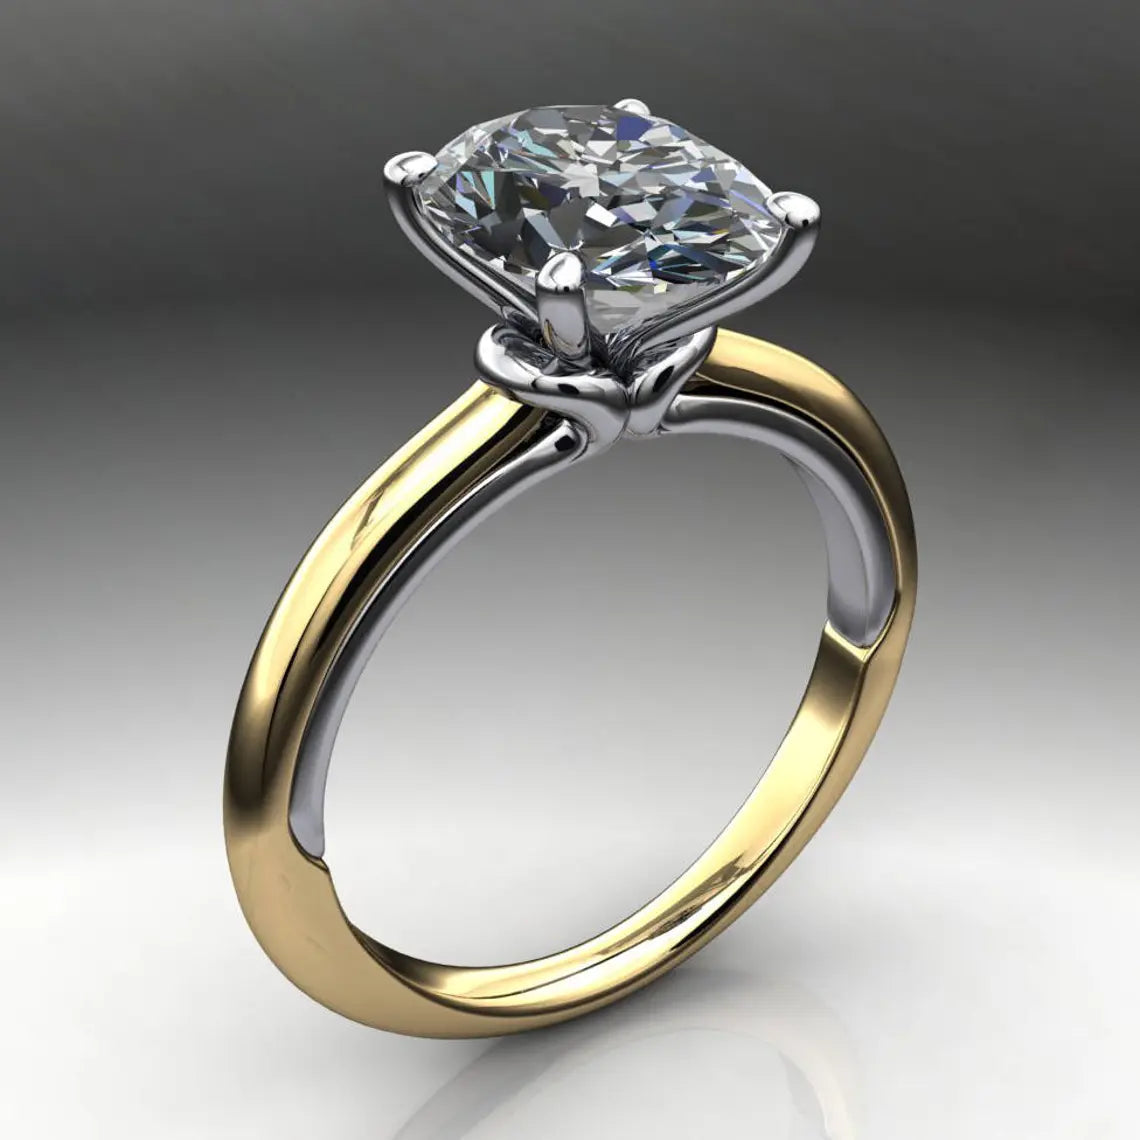 winona ring - 3 carat oval NEO moissanite engagement ring, two tone ring - J Hollywood Designs